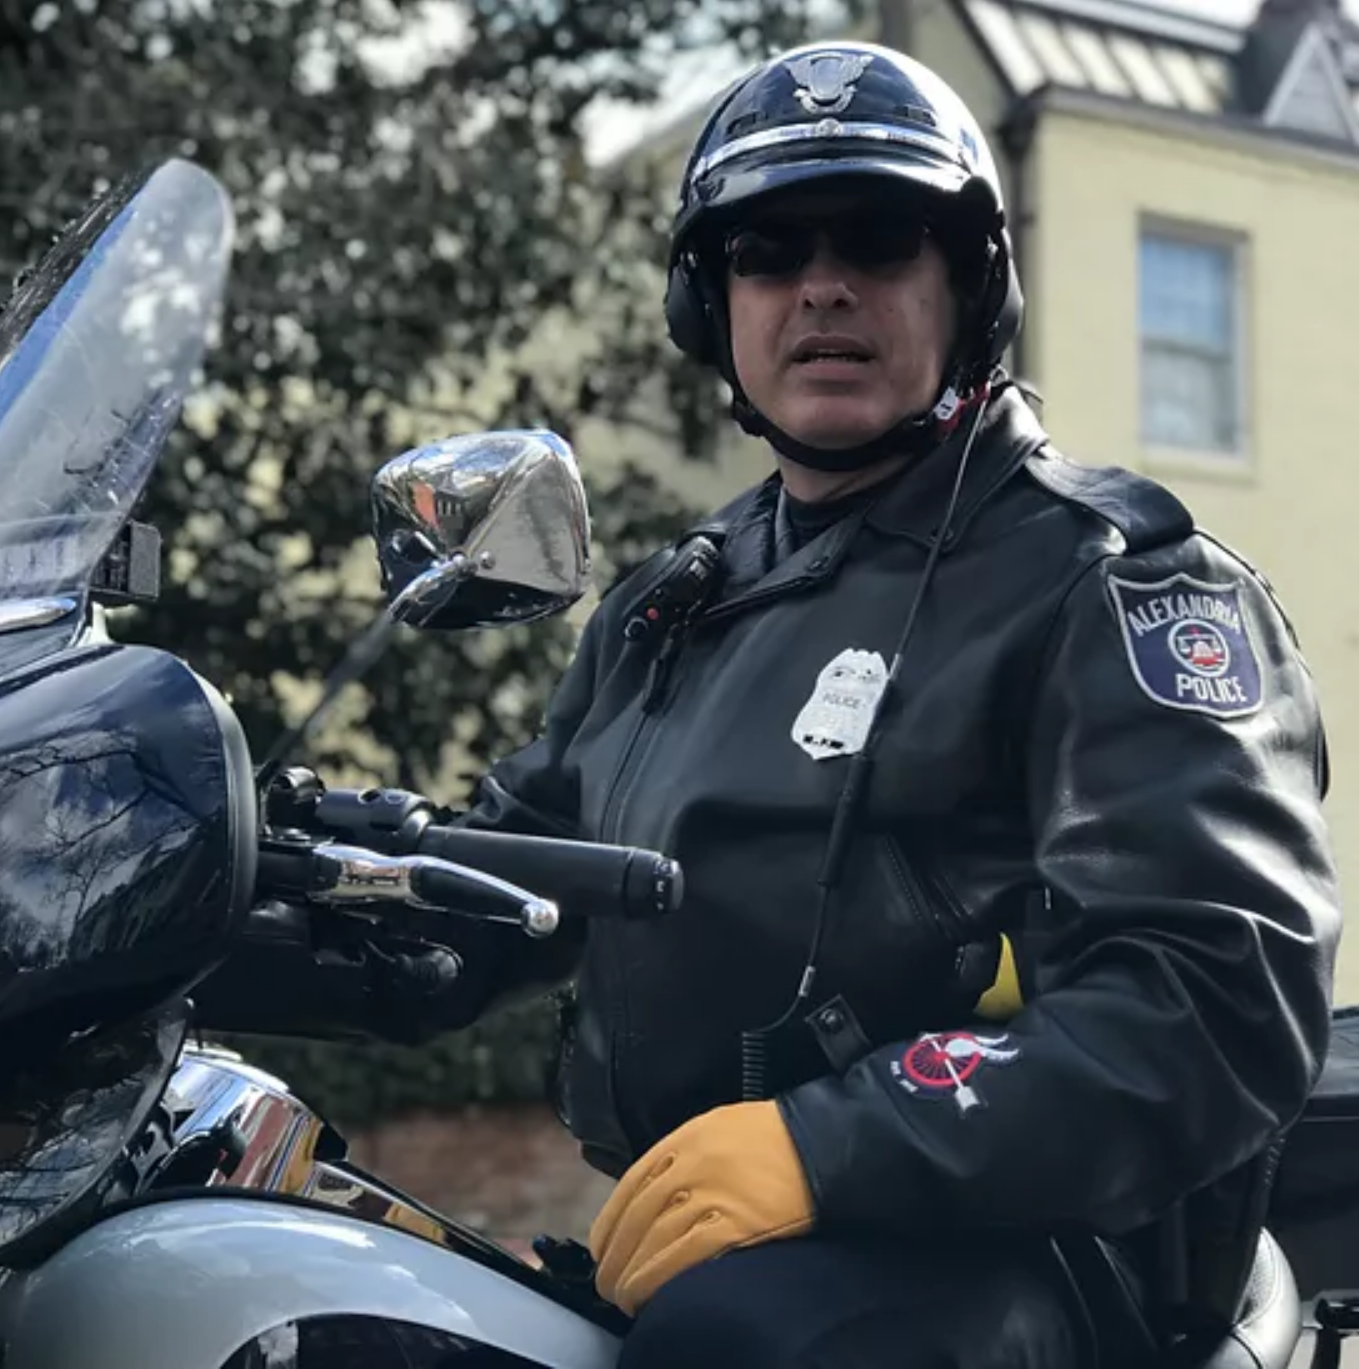 Trapero, wearing a motorcyle helmet and sunglasses, is sitting on his APD motorcycle.